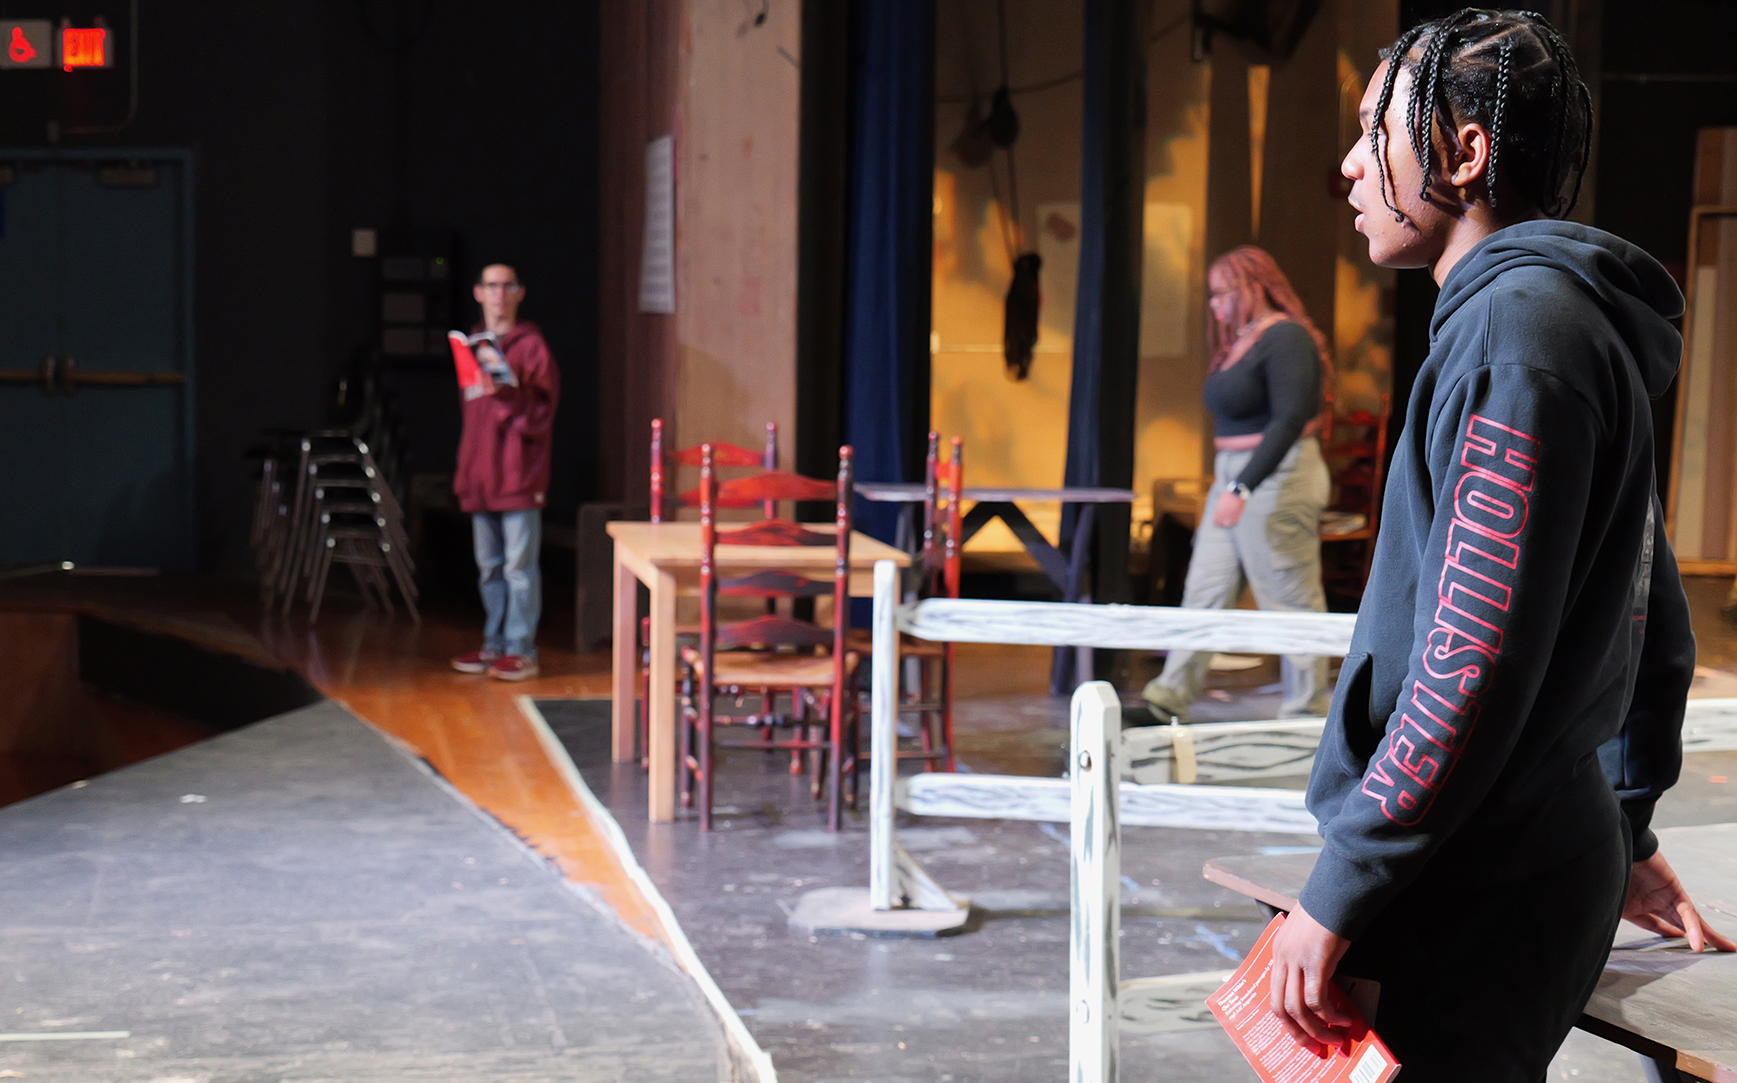 Drama students rehearsing on stage